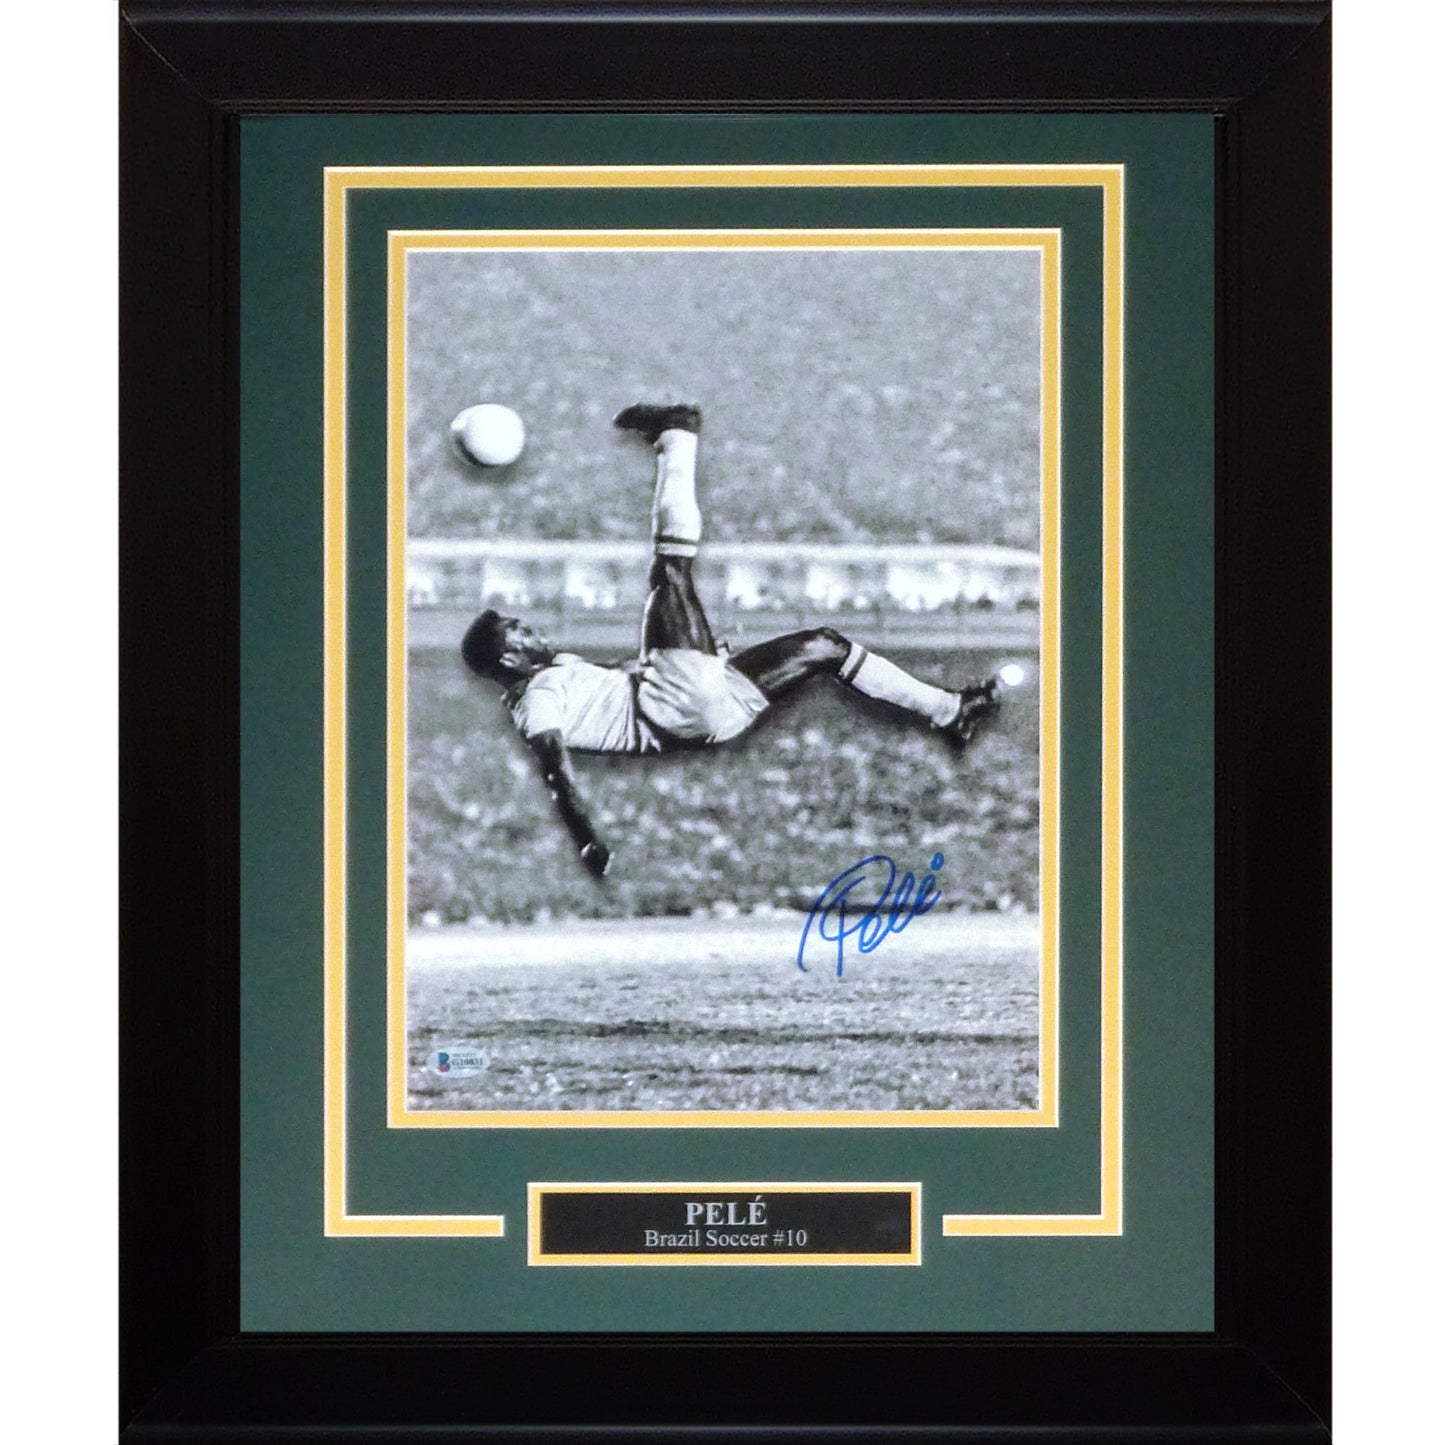 Pele Autographed Brazil Soccer (Bicycle Kick) Deluxe Framed 11x14 Photo – Beckett